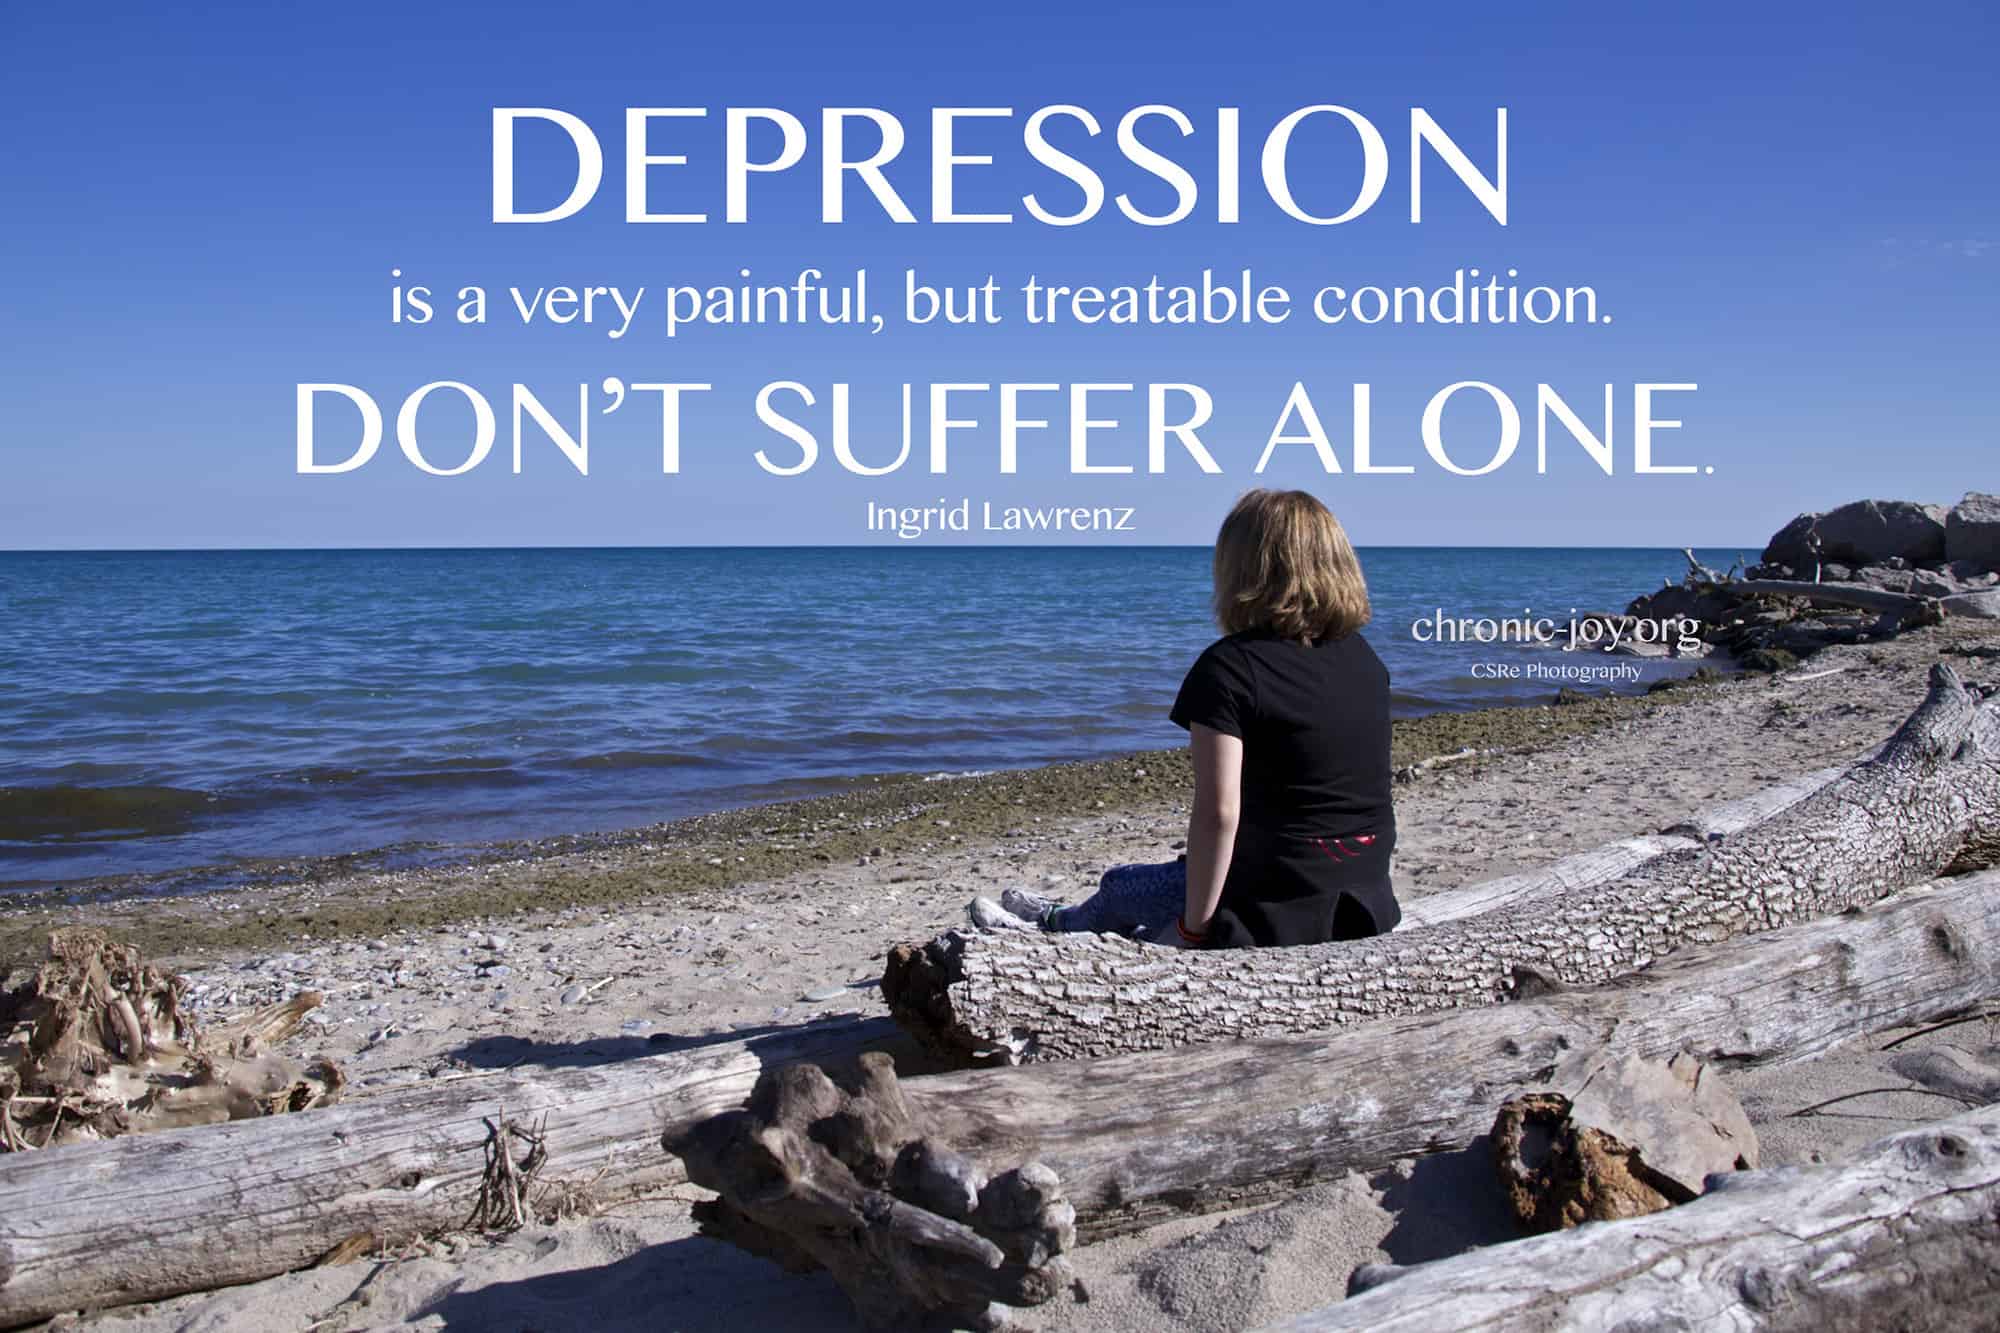 Depression is very painful.